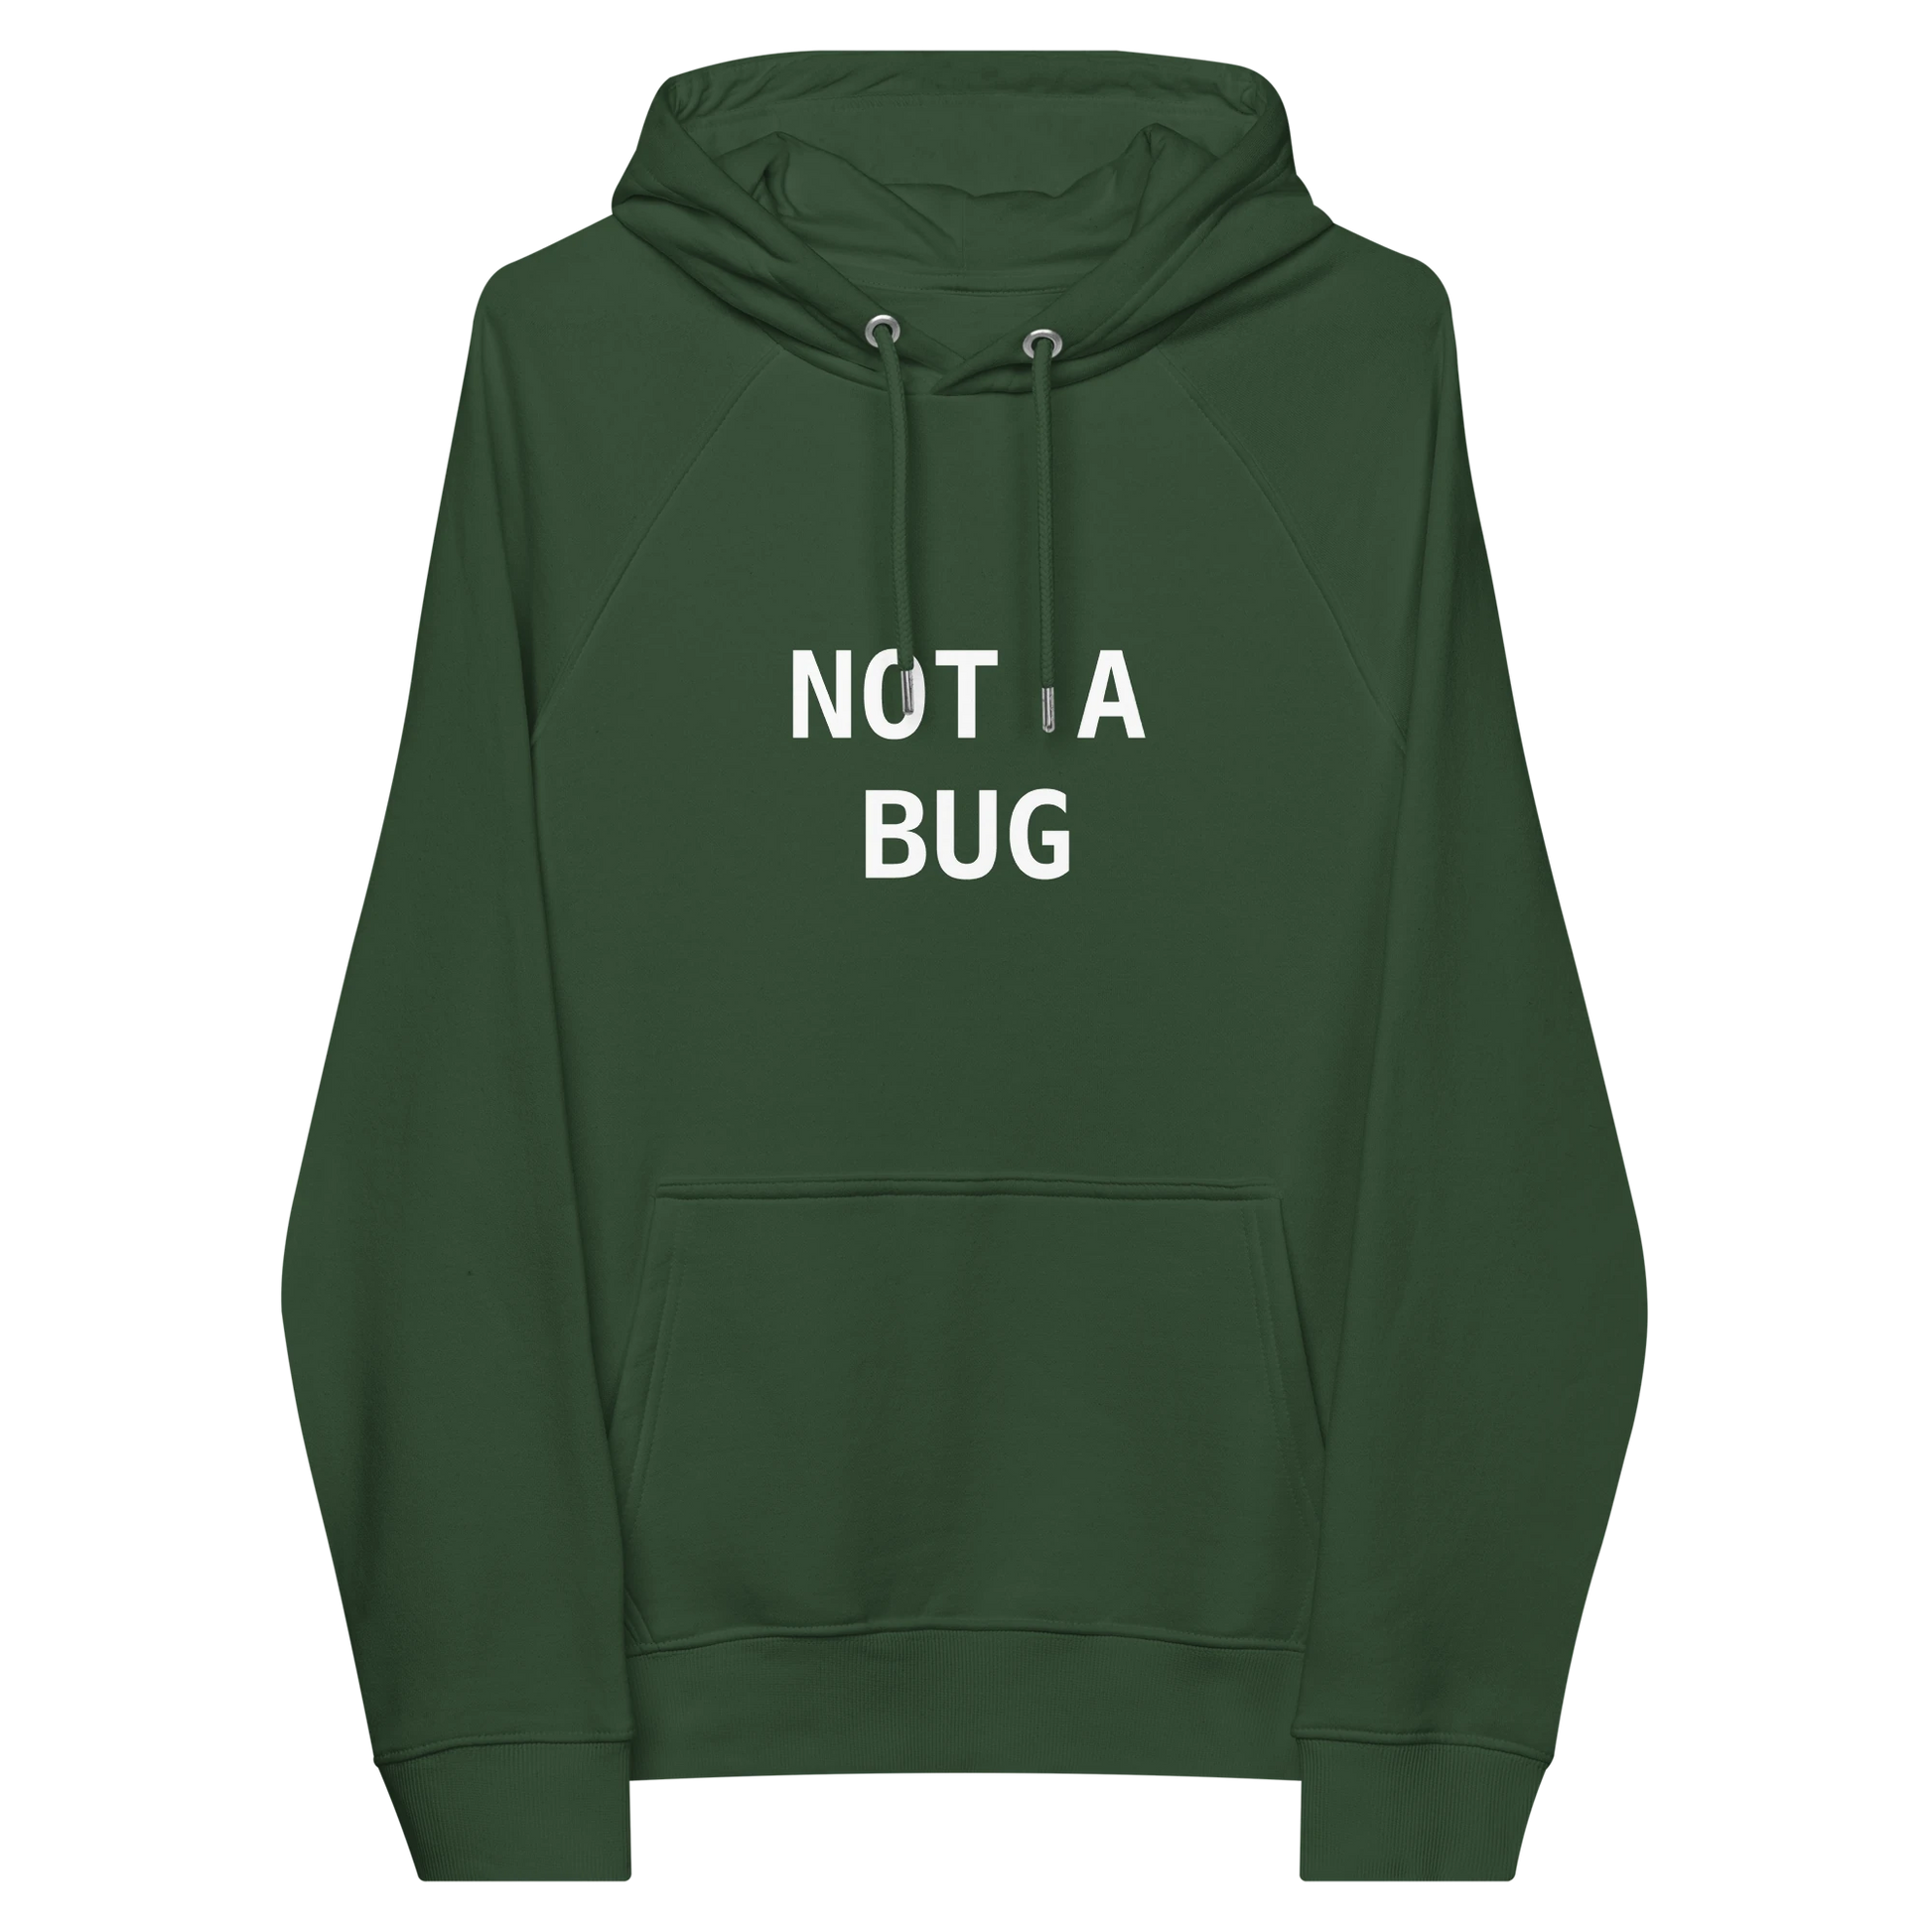 NOT A BUG premium hoodie front flat 2 front